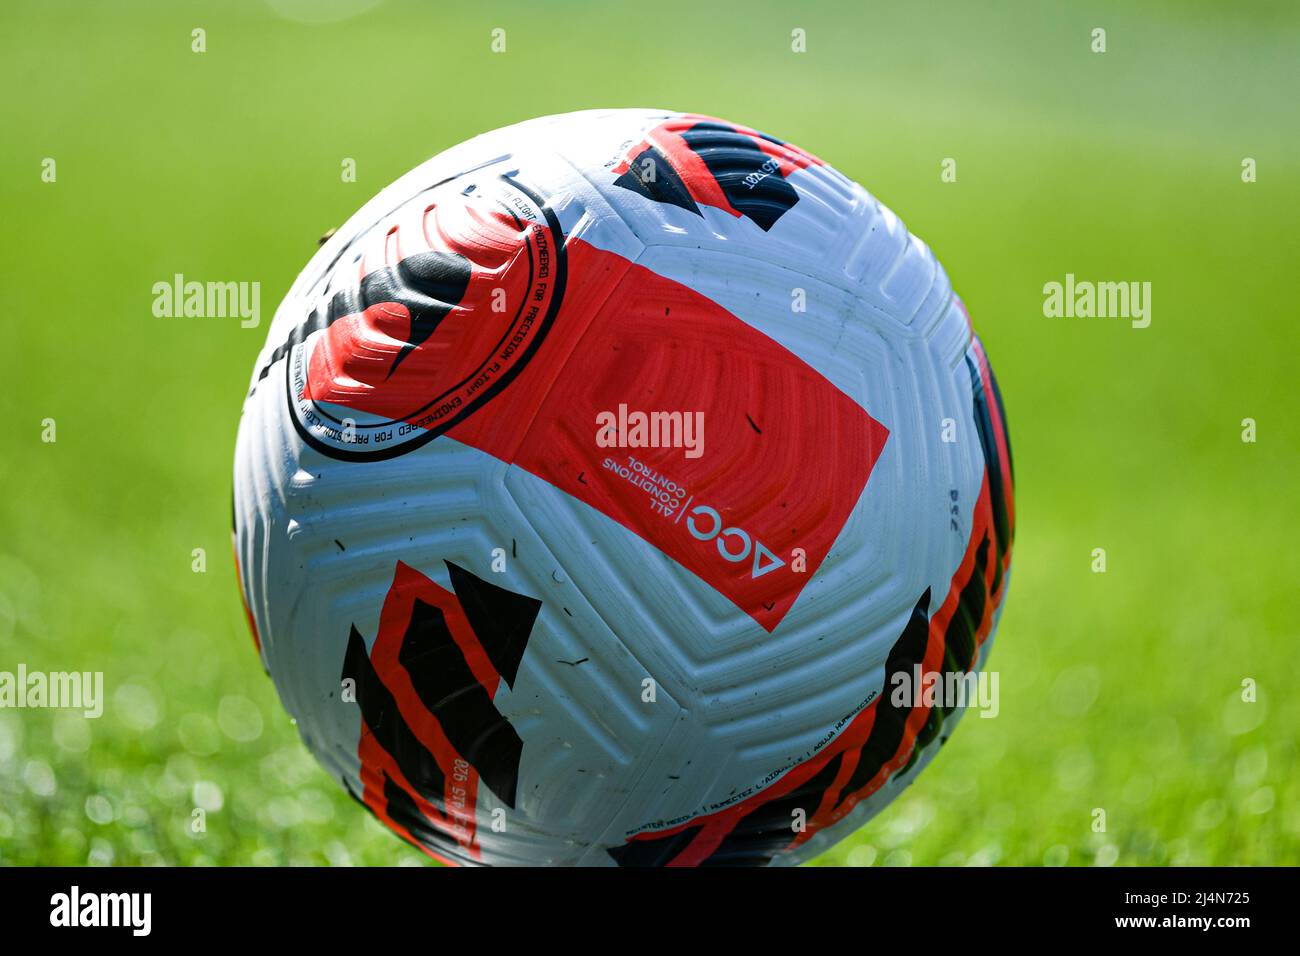 Illustration picture shows the official ball Nike All Conditions Control ( ACC) during the Women's French championship D1 Arkema football match  between Paris Saint-Germain (PSG) and GPSO 92 Issy on April 16, 2022